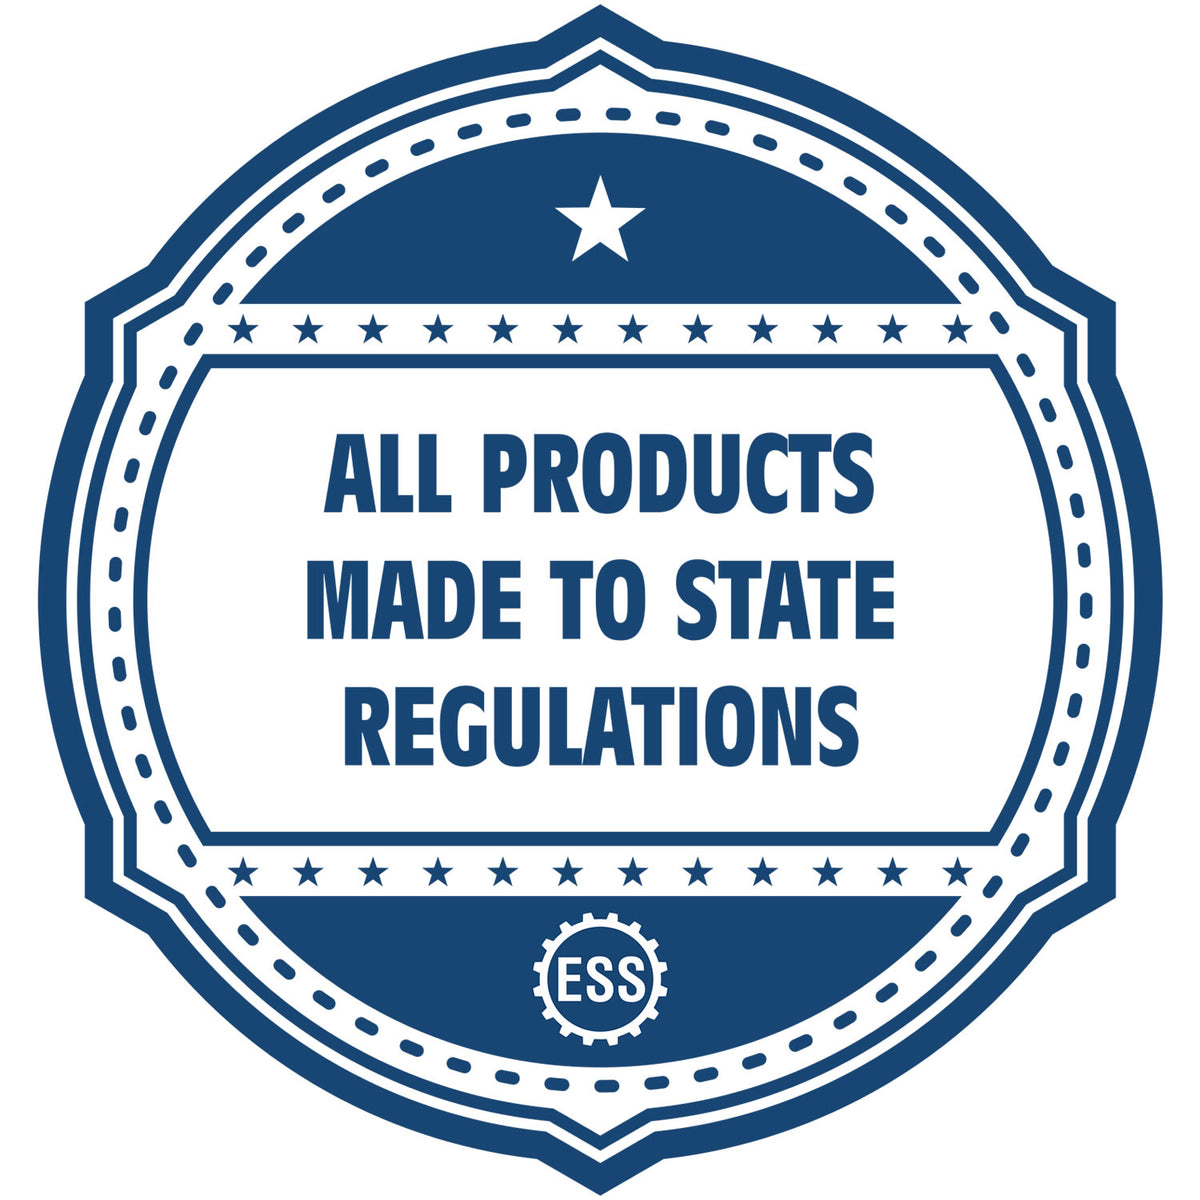 An icon or badge element for the Super Slim Illinois Notary Public Stamp showing that this product is made in compliance with state regulations.